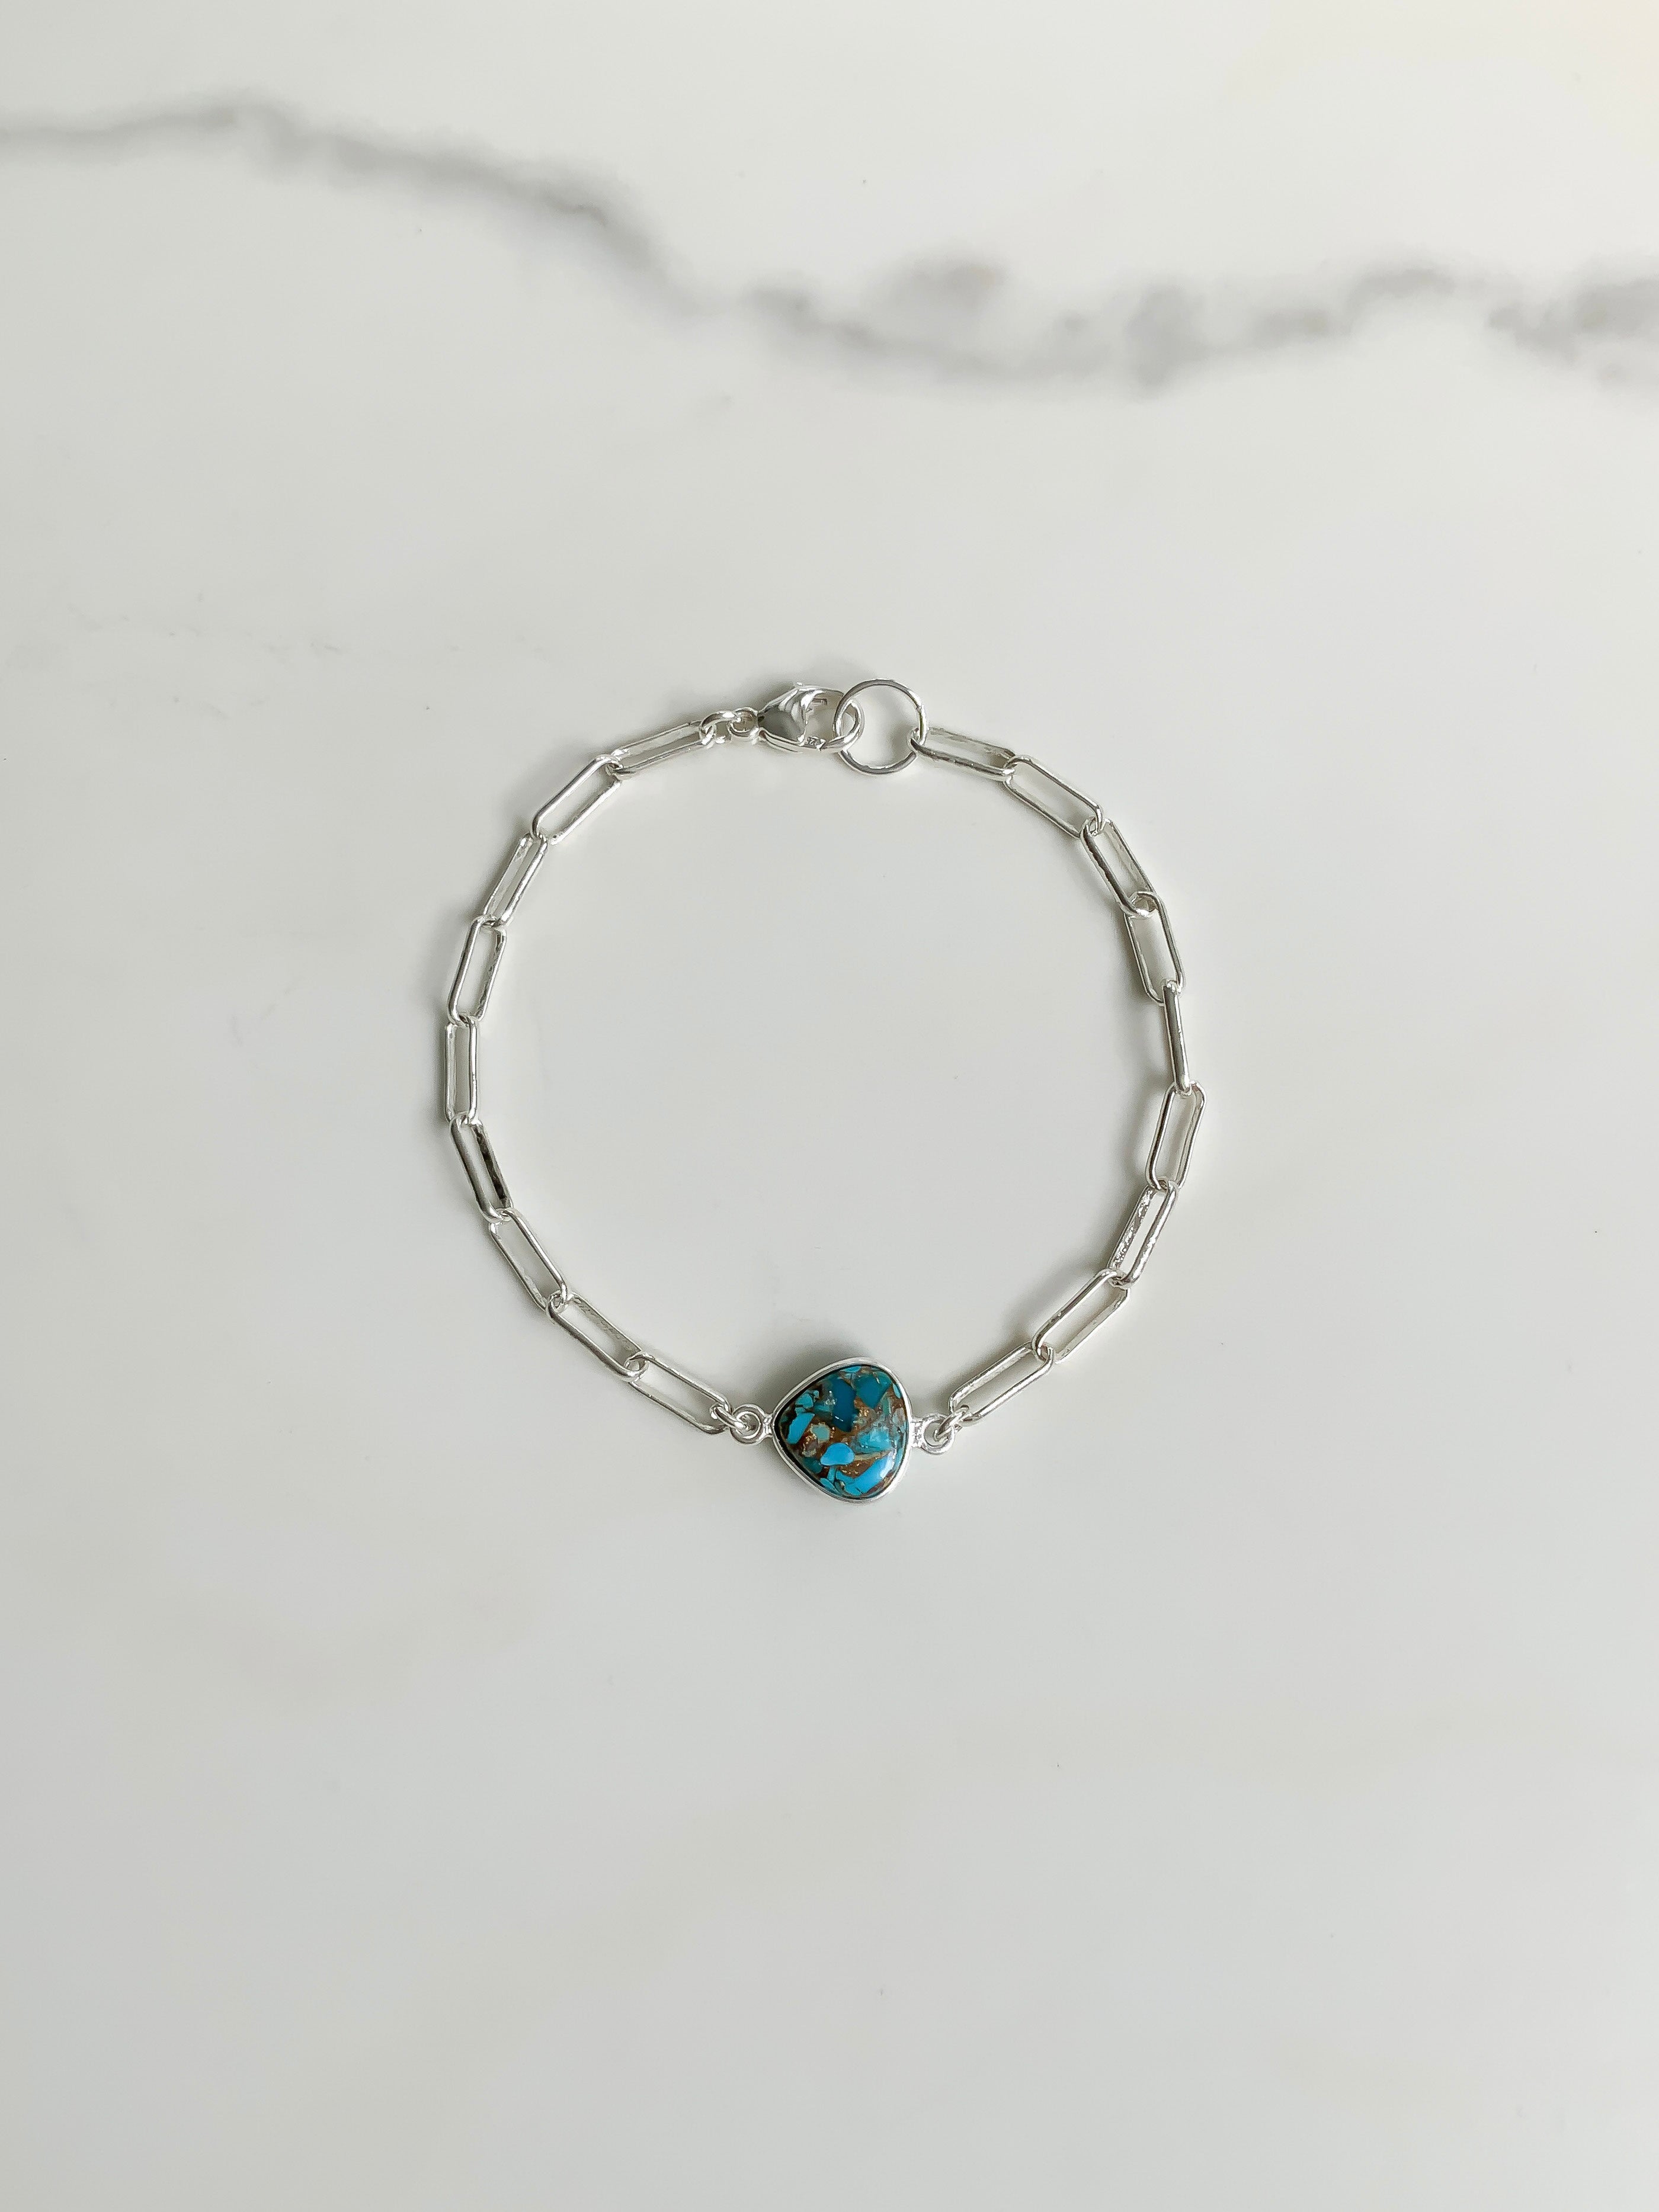 Independence Pass Turquoise Bracelet